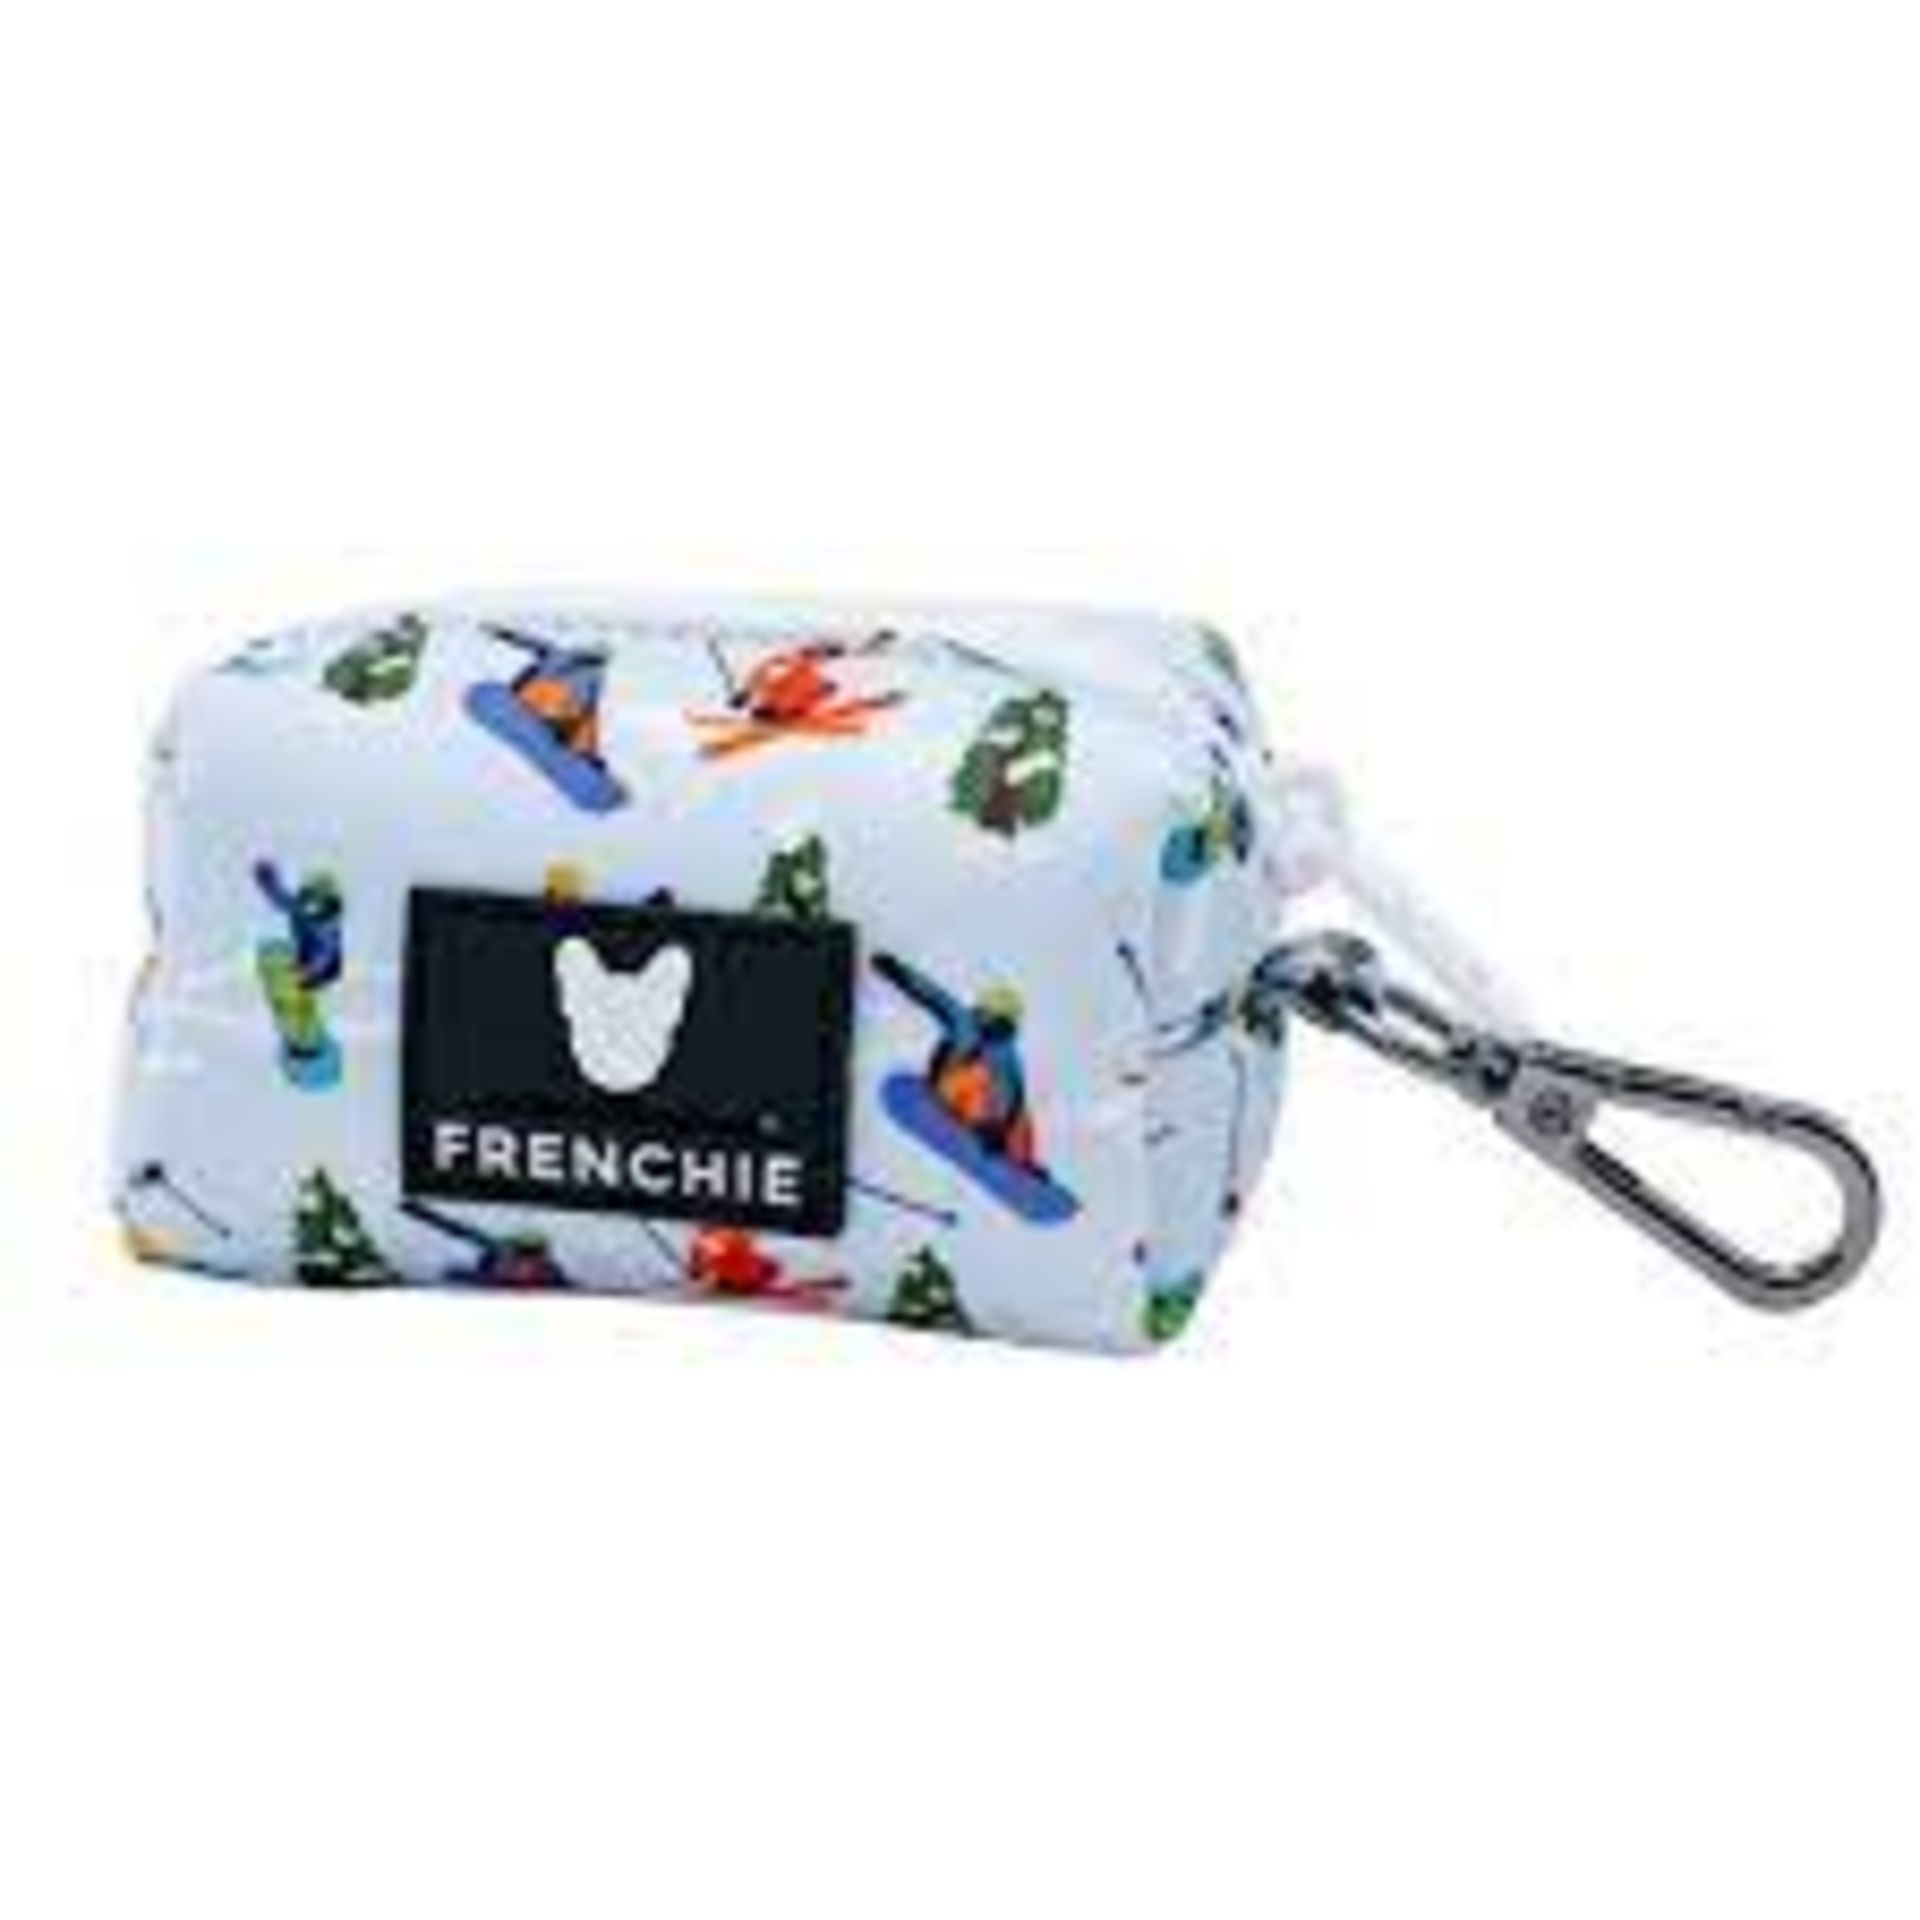 Trade Lot 100 X New .Packaged Frenchie The Bulldog Luxury Branded Dog Products. May include items - Image 9 of 50